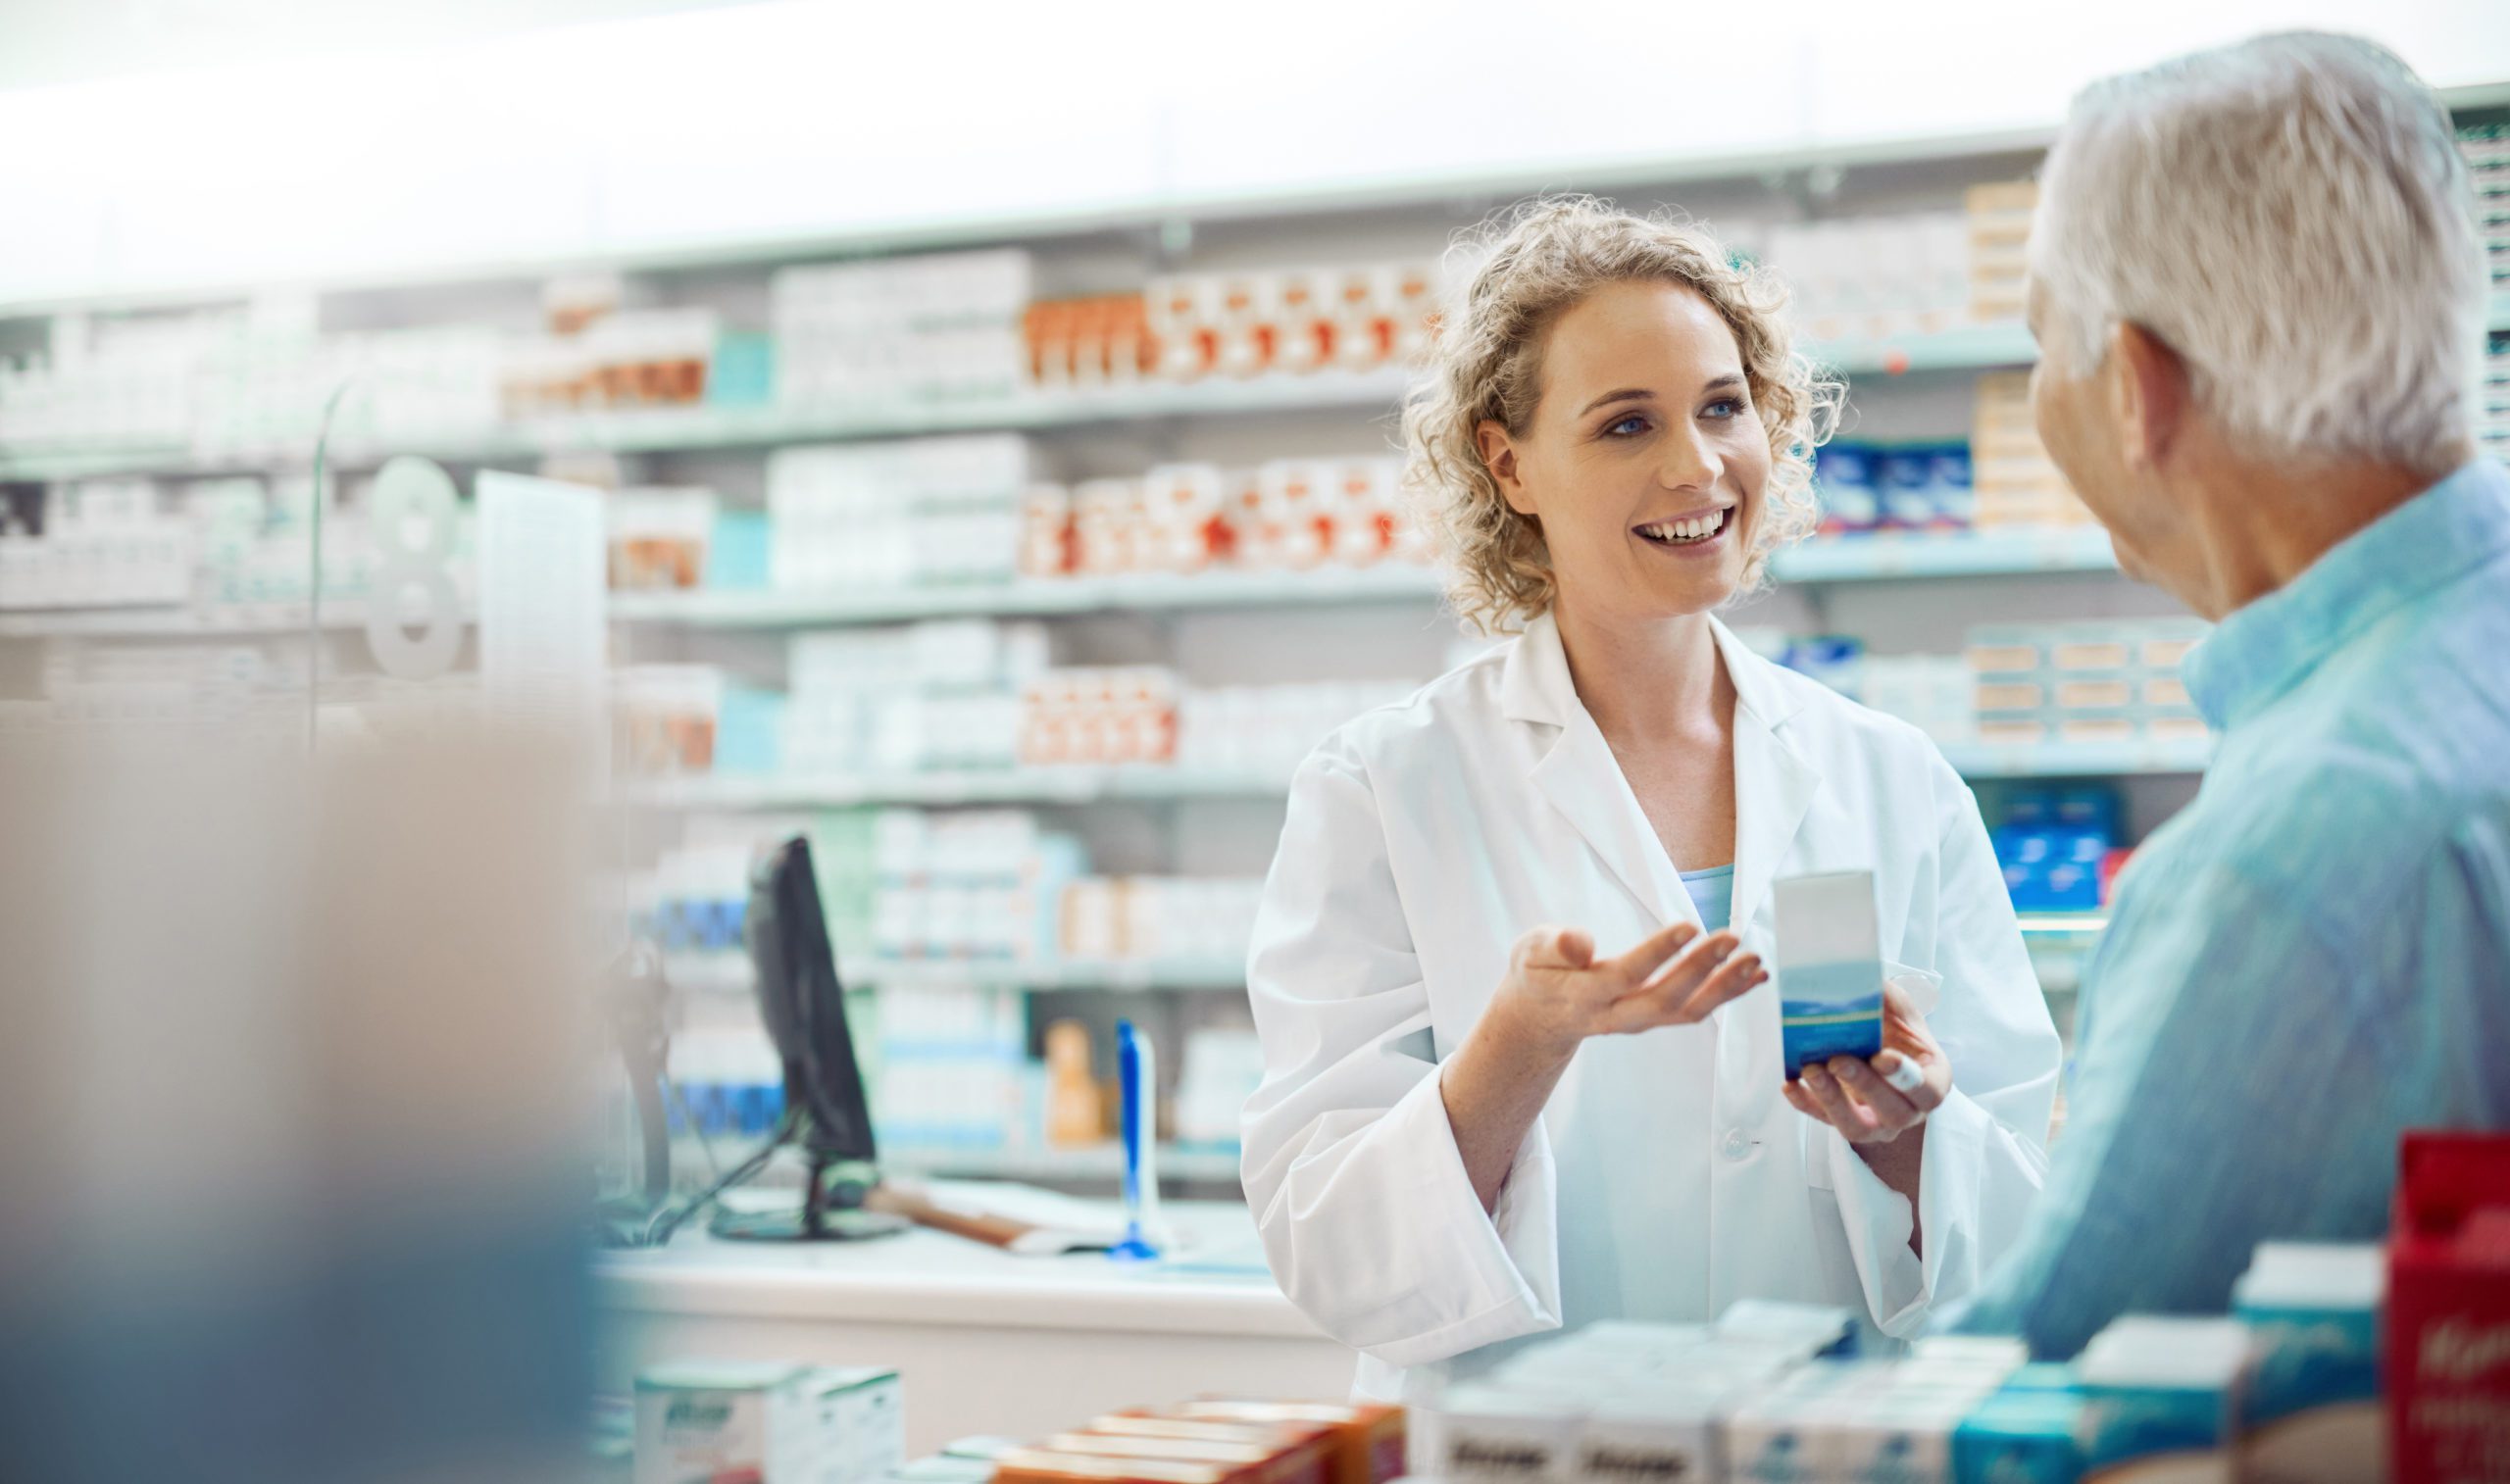 Difference between an in-house pharmacy and a retail pharmacy